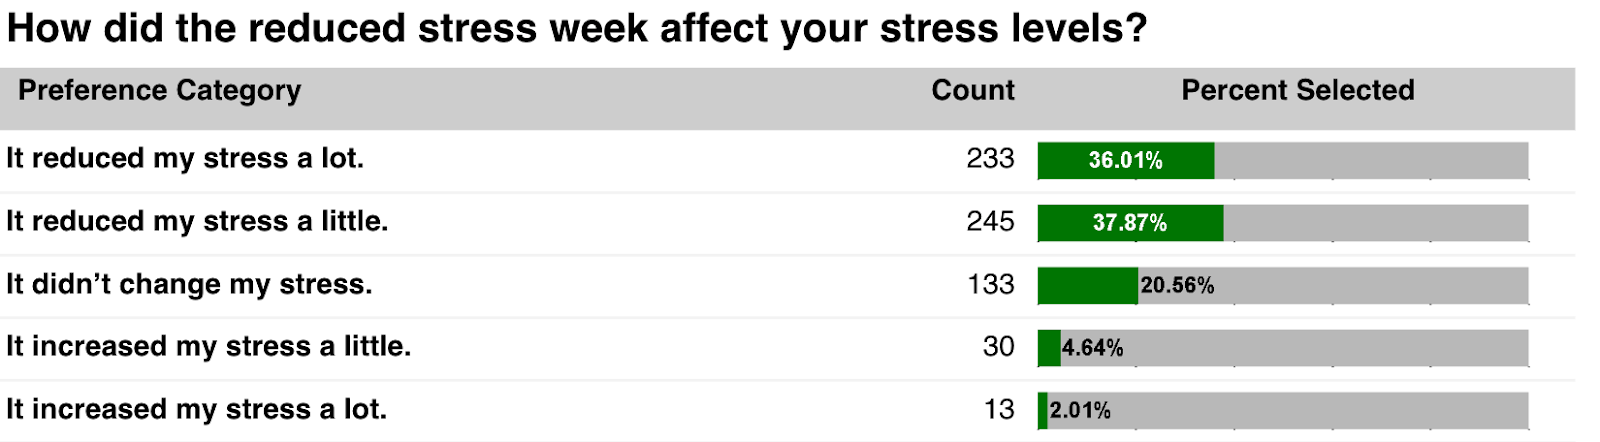 Redfin's reduced stress survey: How did the reduced stress week affect your stress levels?